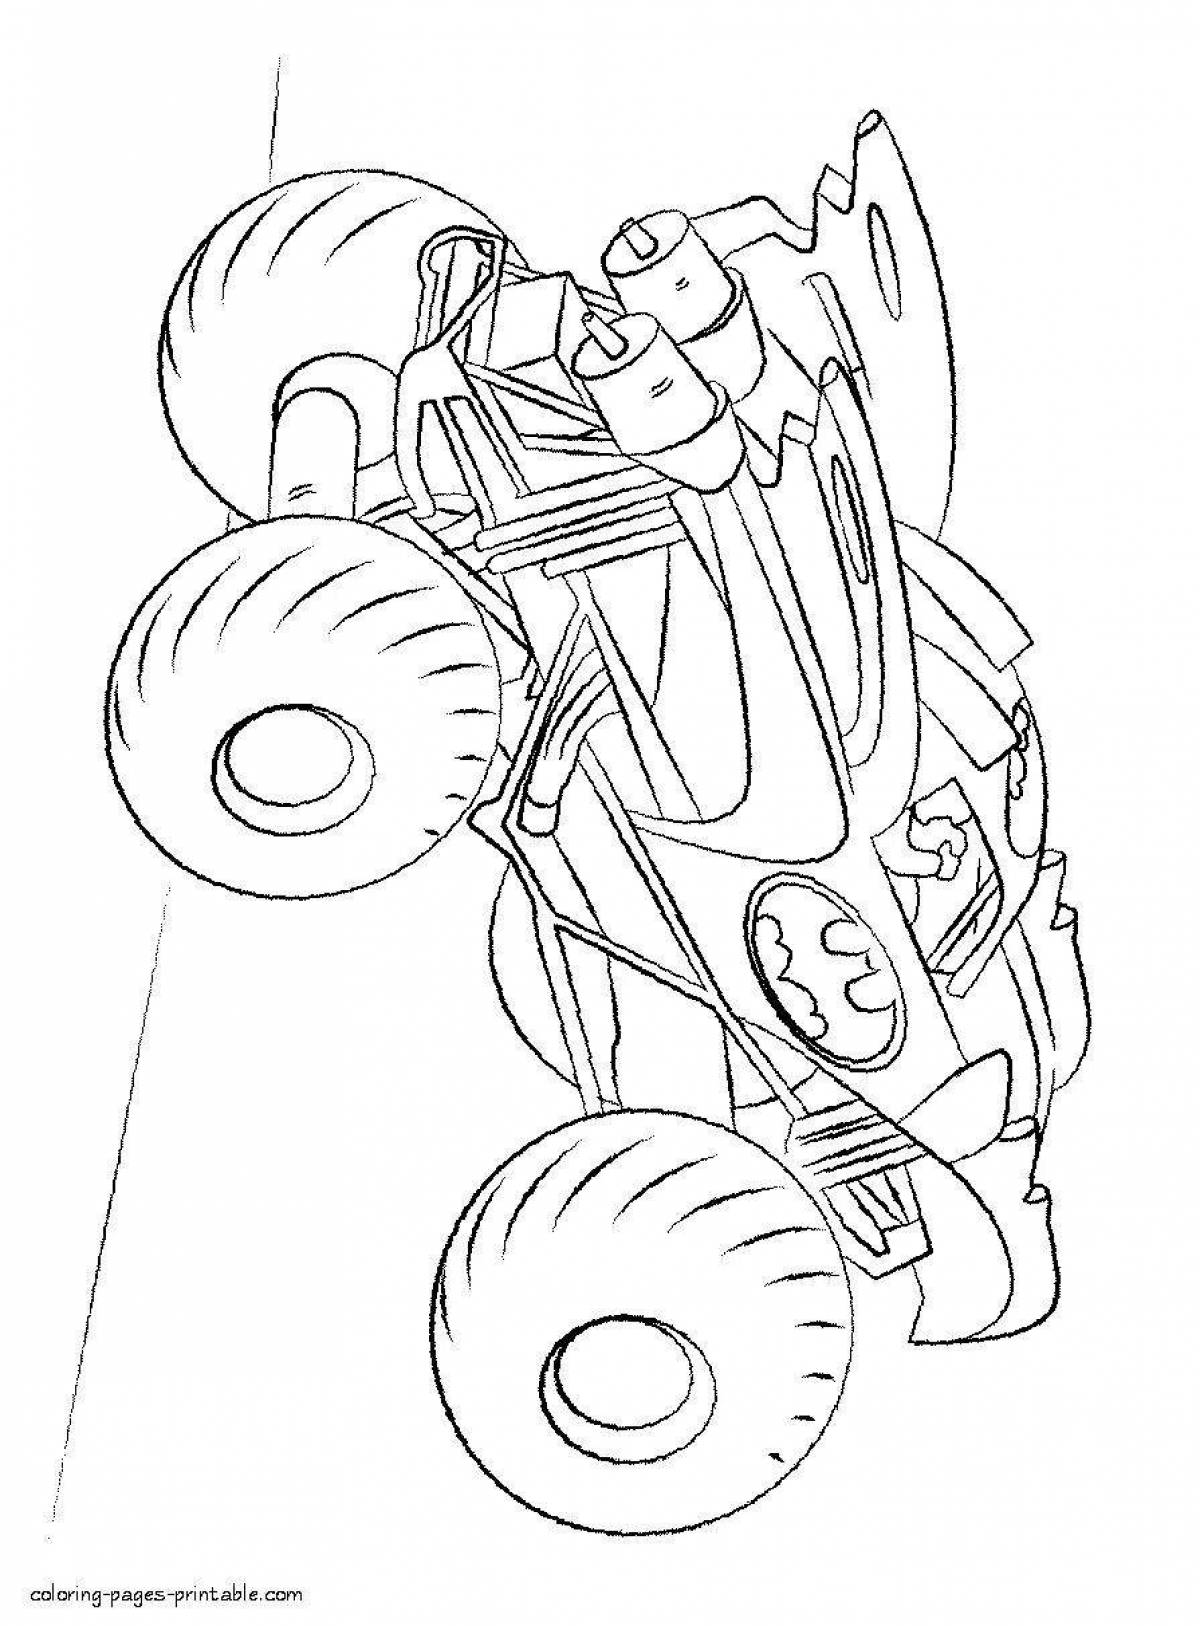 Radiant coloring page monster truck dinosaur